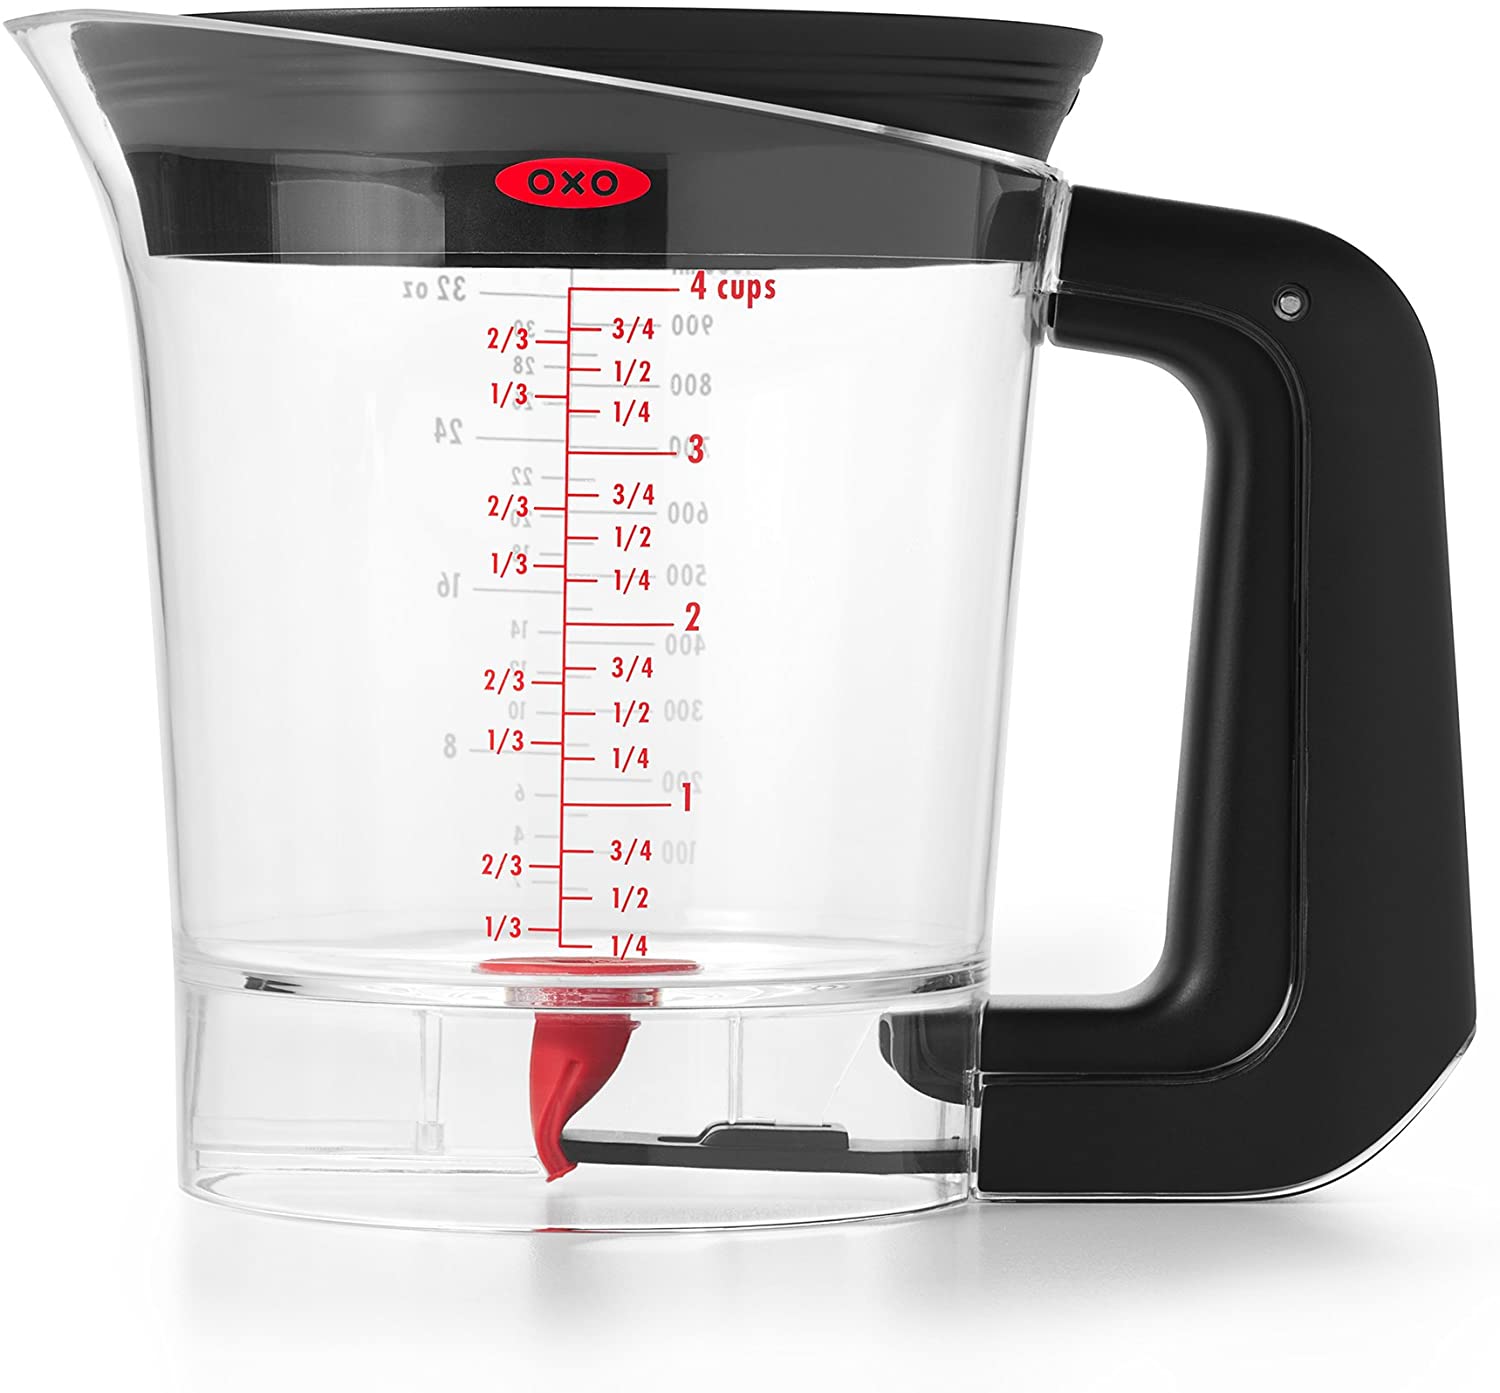 10 handy kitchen gadgets that make holiday cooking and baking easier: OXO fat separator | Amazon